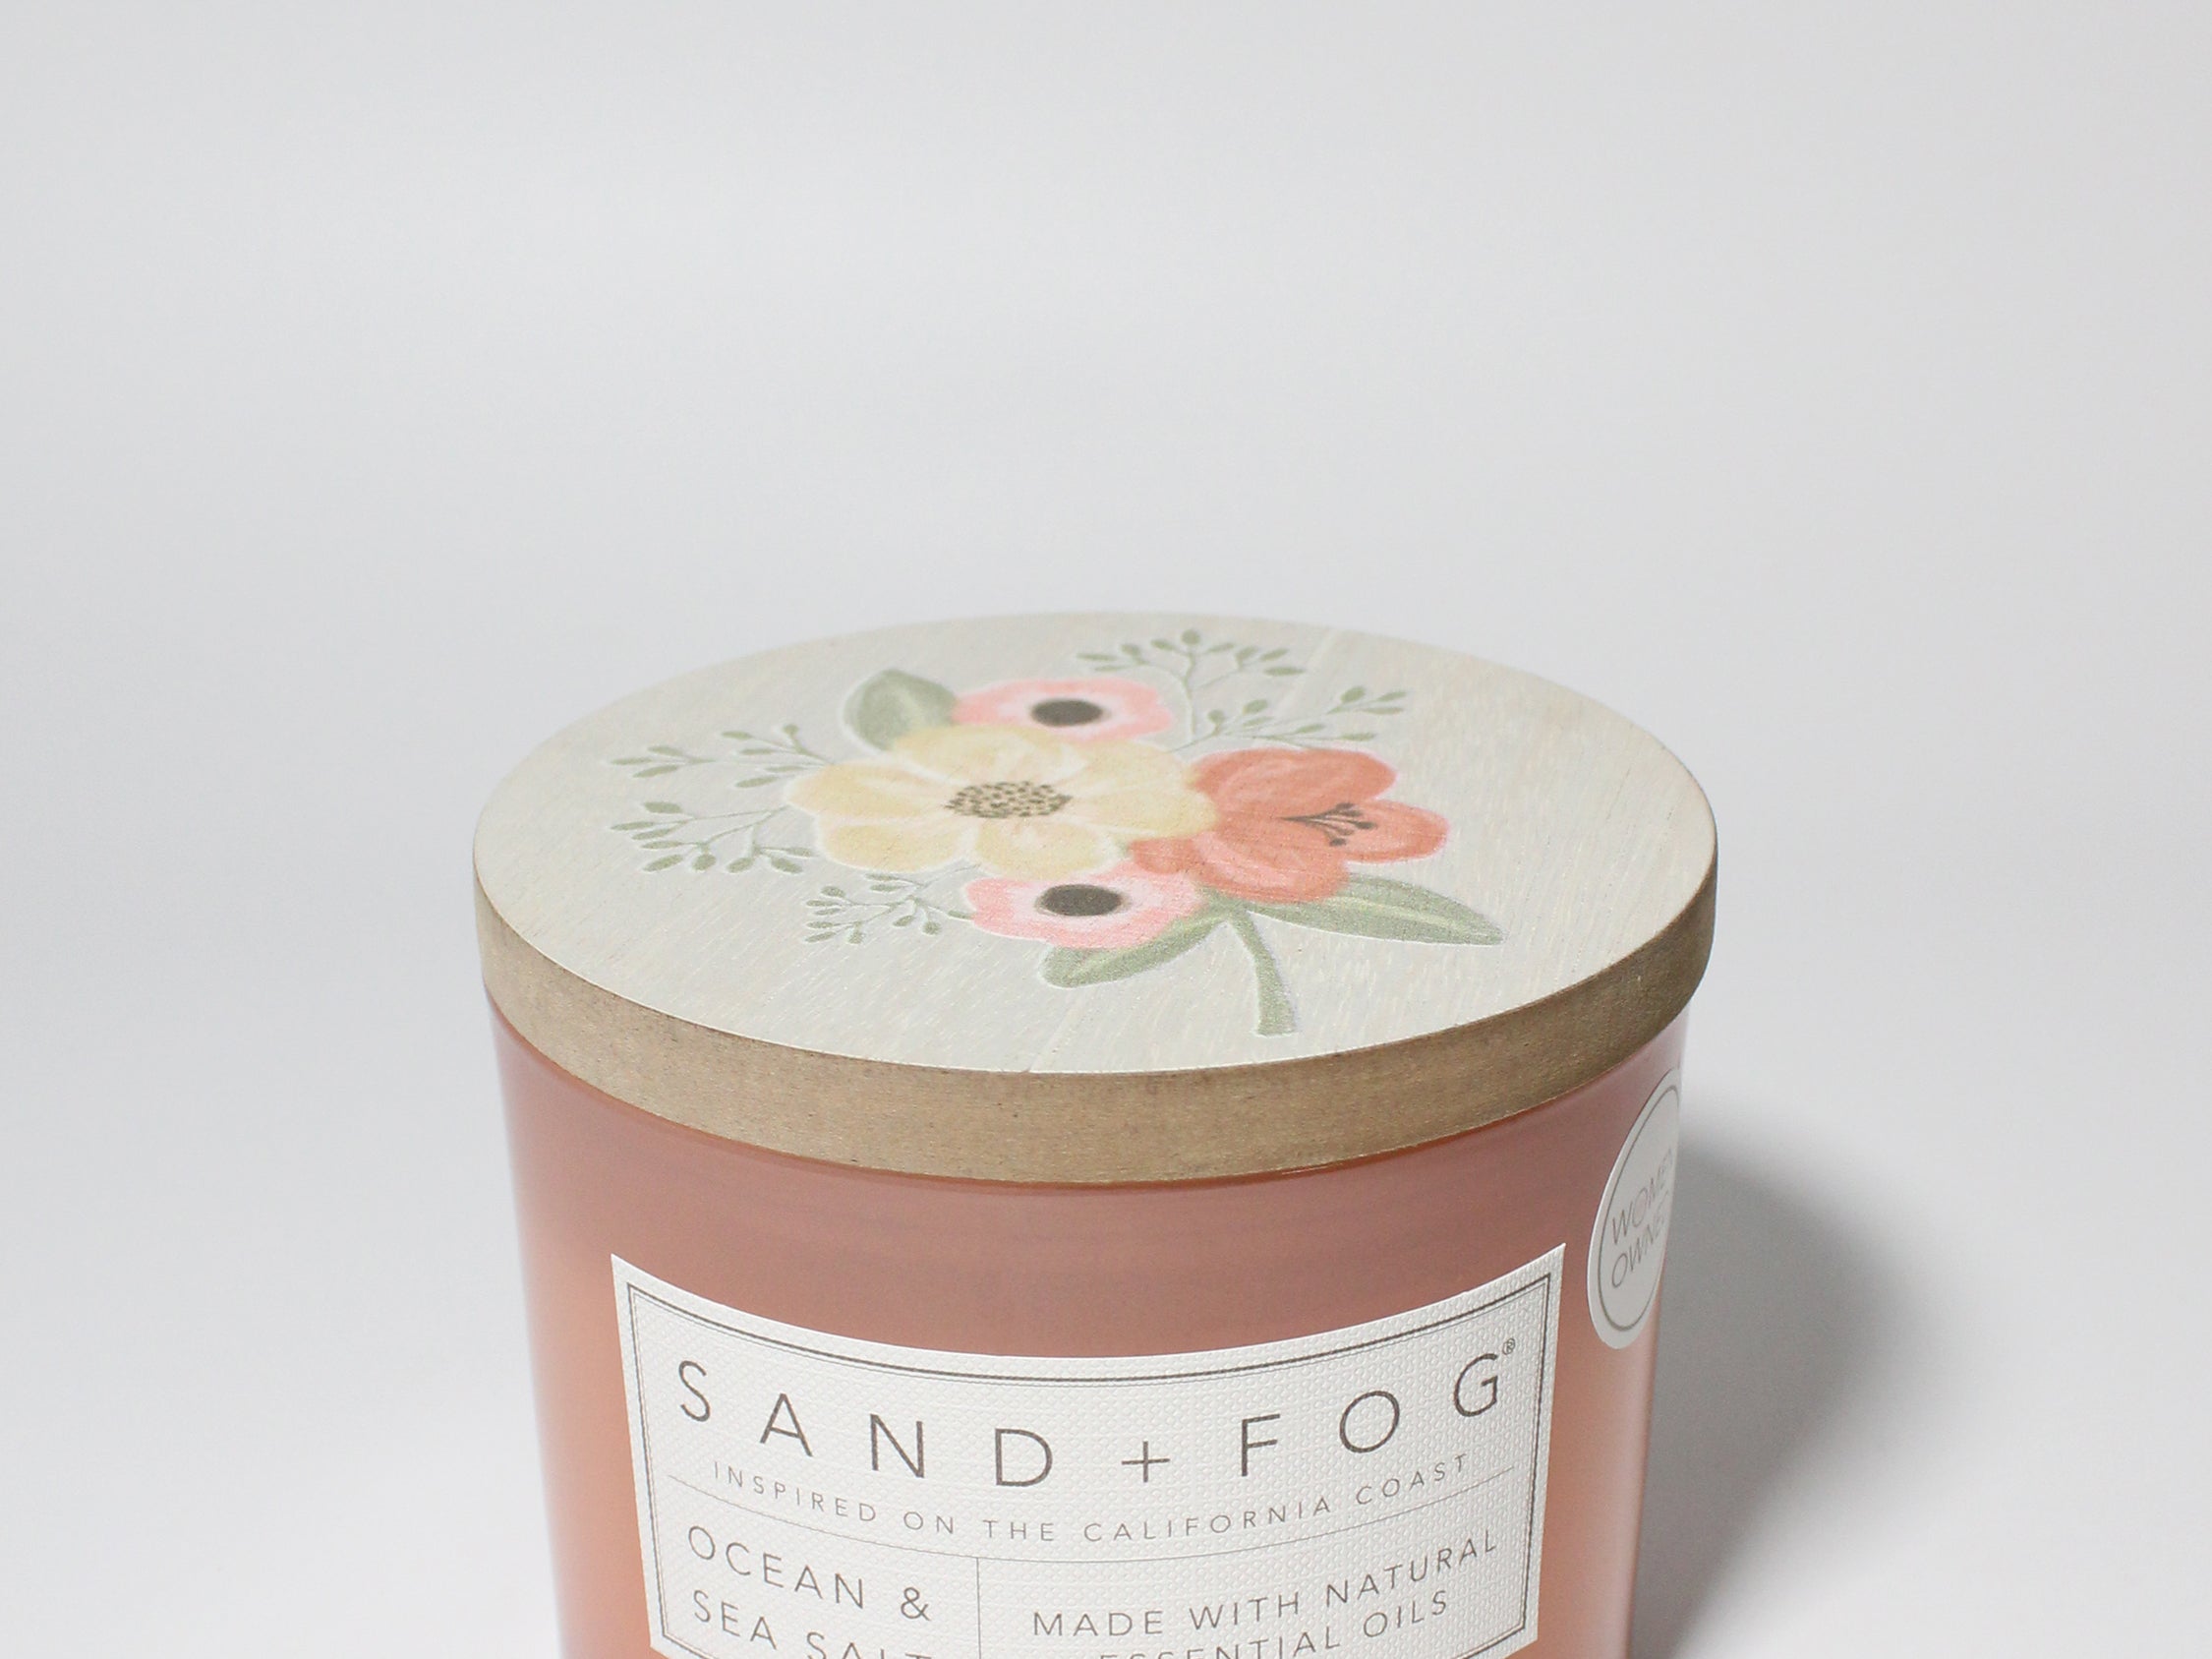 Ocean & Sea Salt 12 oz scented candle Pink vessel with Painted floral lid